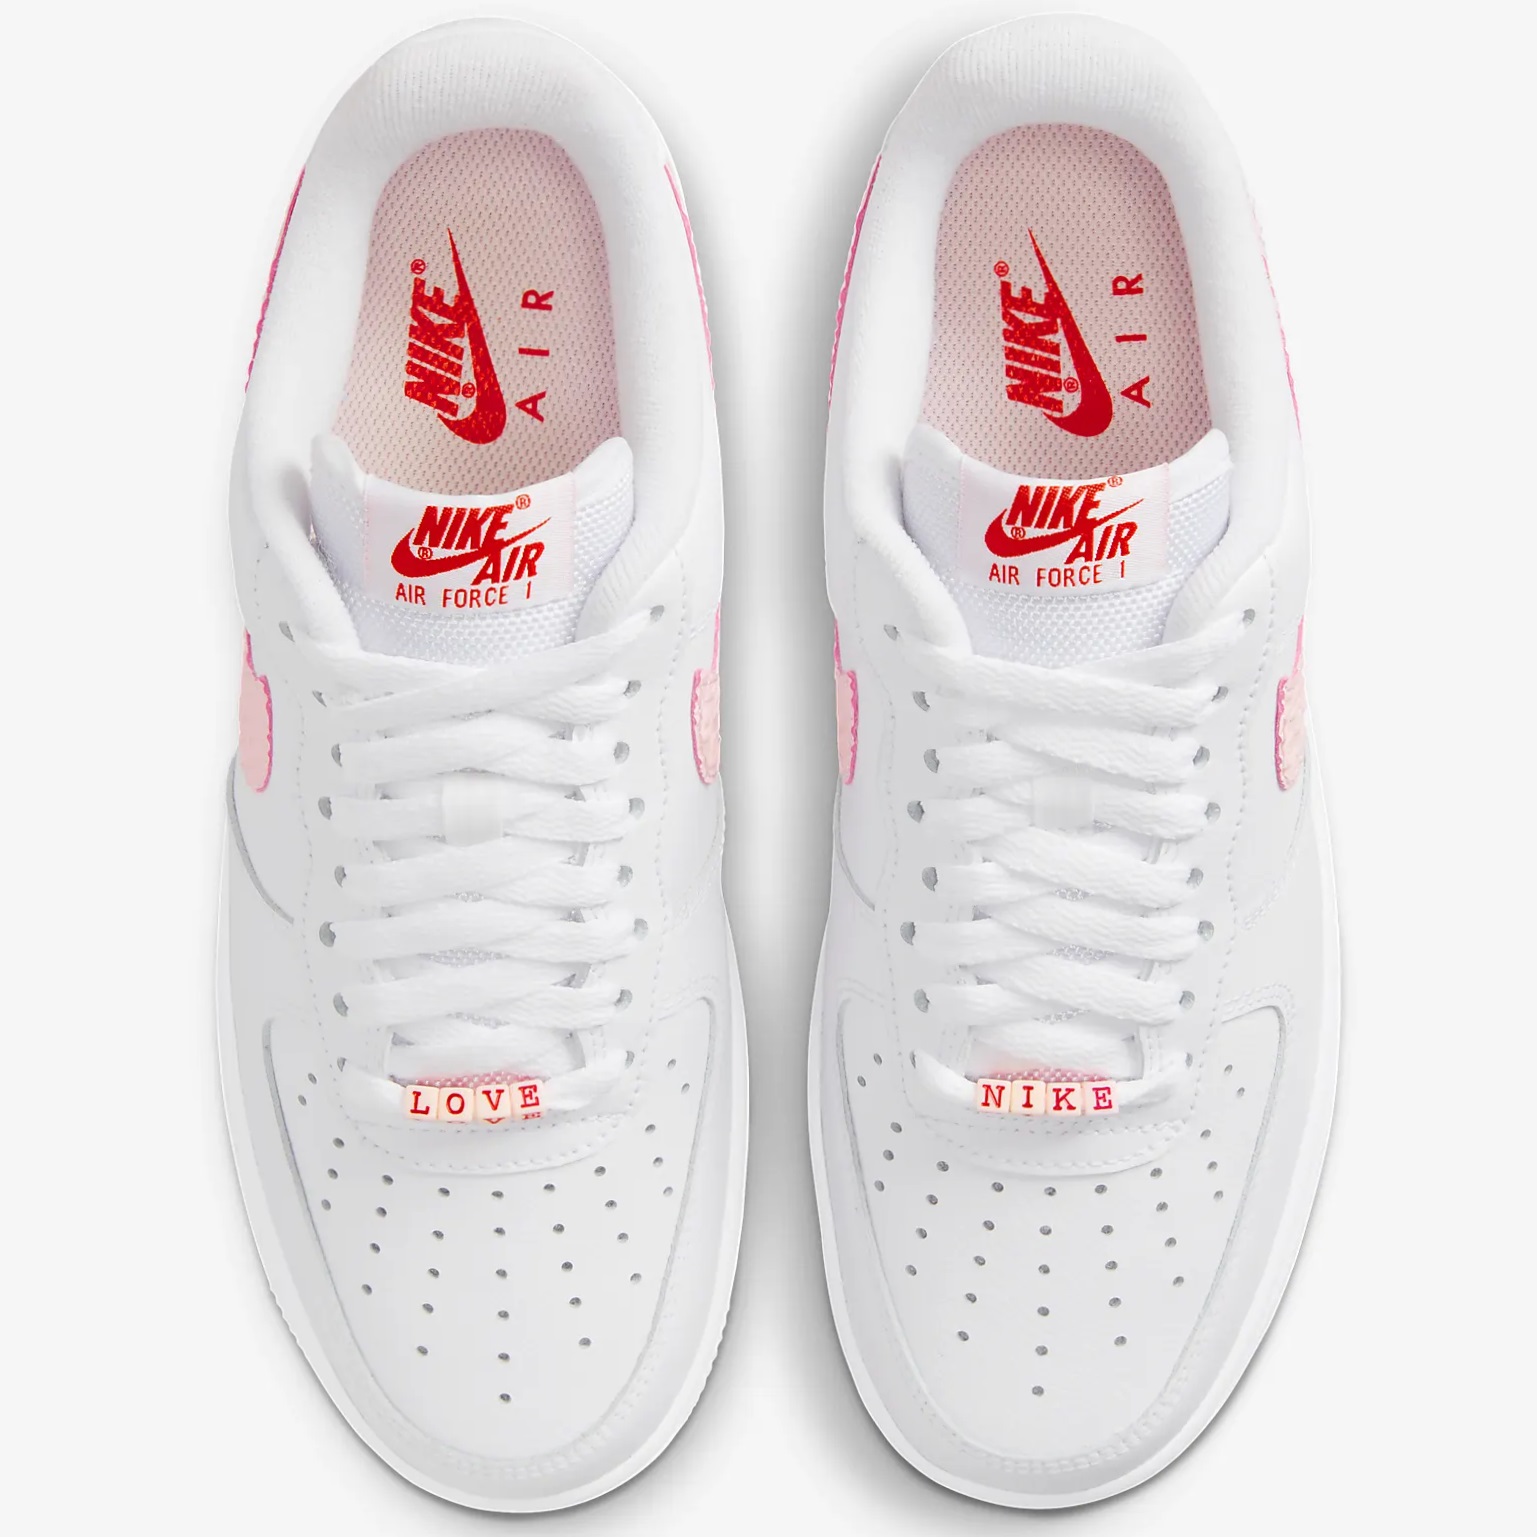 GIÀY NỮ NIKE AIR FORCE 1 07 LOW VD VALENTINE S DAY WHITE ATMOSPHERE UNIVERSITY RED SAIL DQ9320-100 1